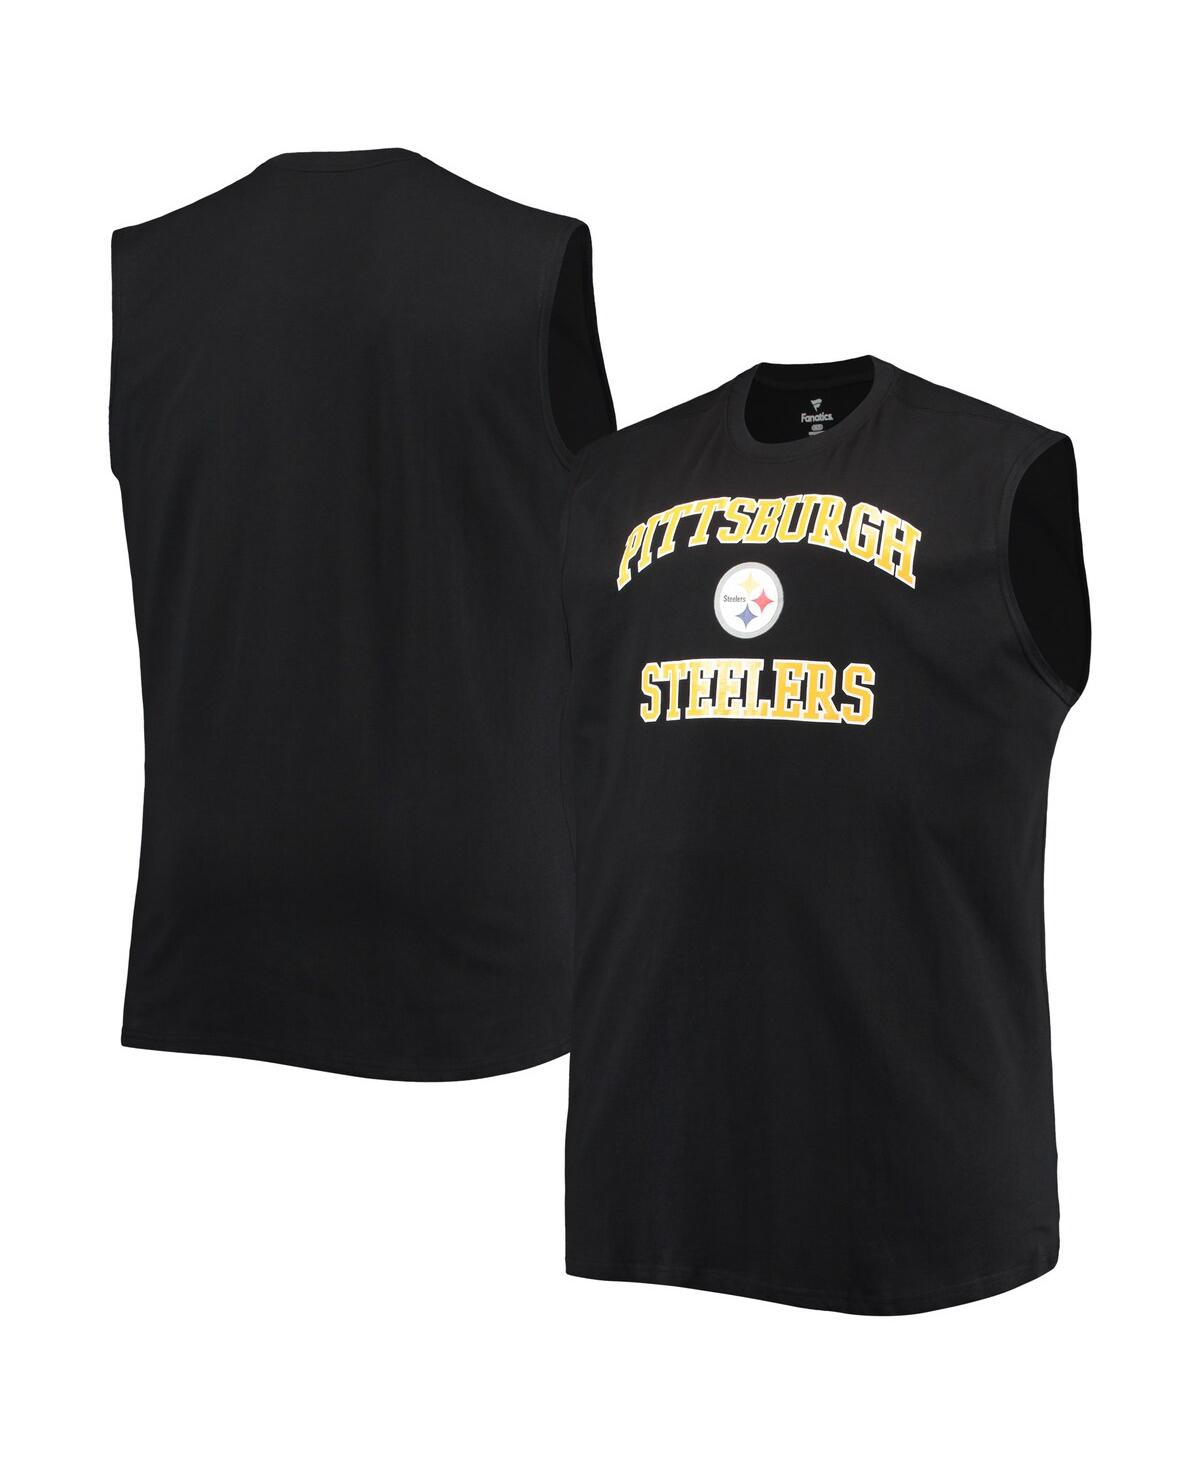 PROFILE MEN'S BLACK PITTSBURGH STEELERS BIG AND TALL MUSCLE TANK TOP